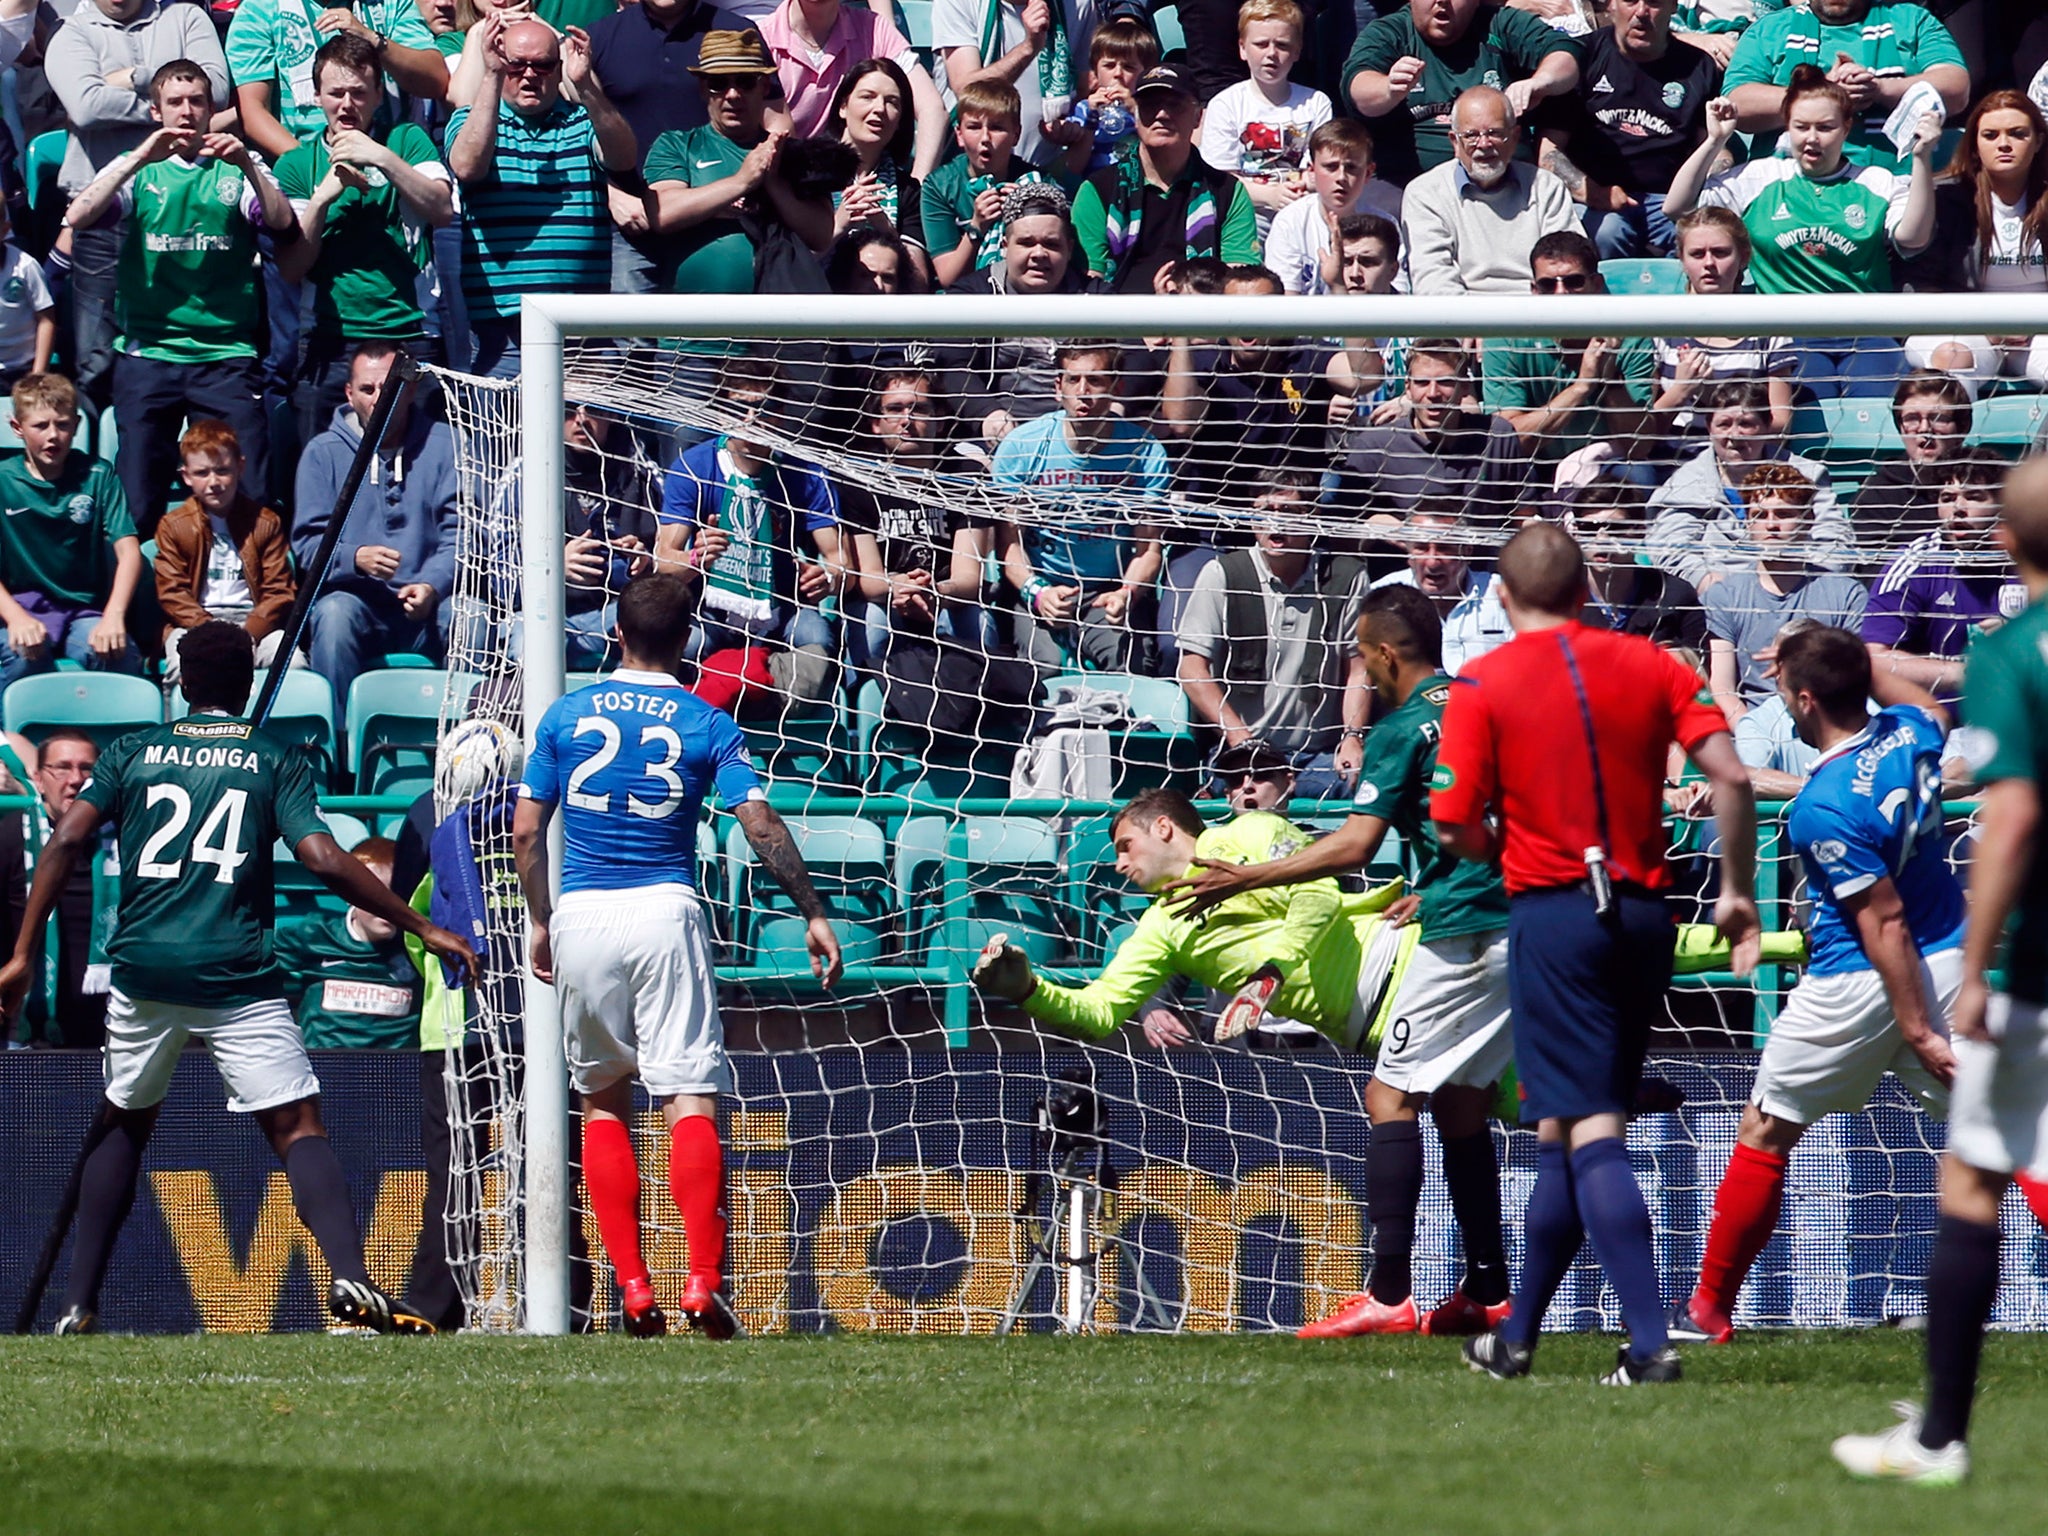 Hibernian's Jason Cummings (not pictured) scores a goal during the Scottish Premiership Play Off Semi Final at Easter Road